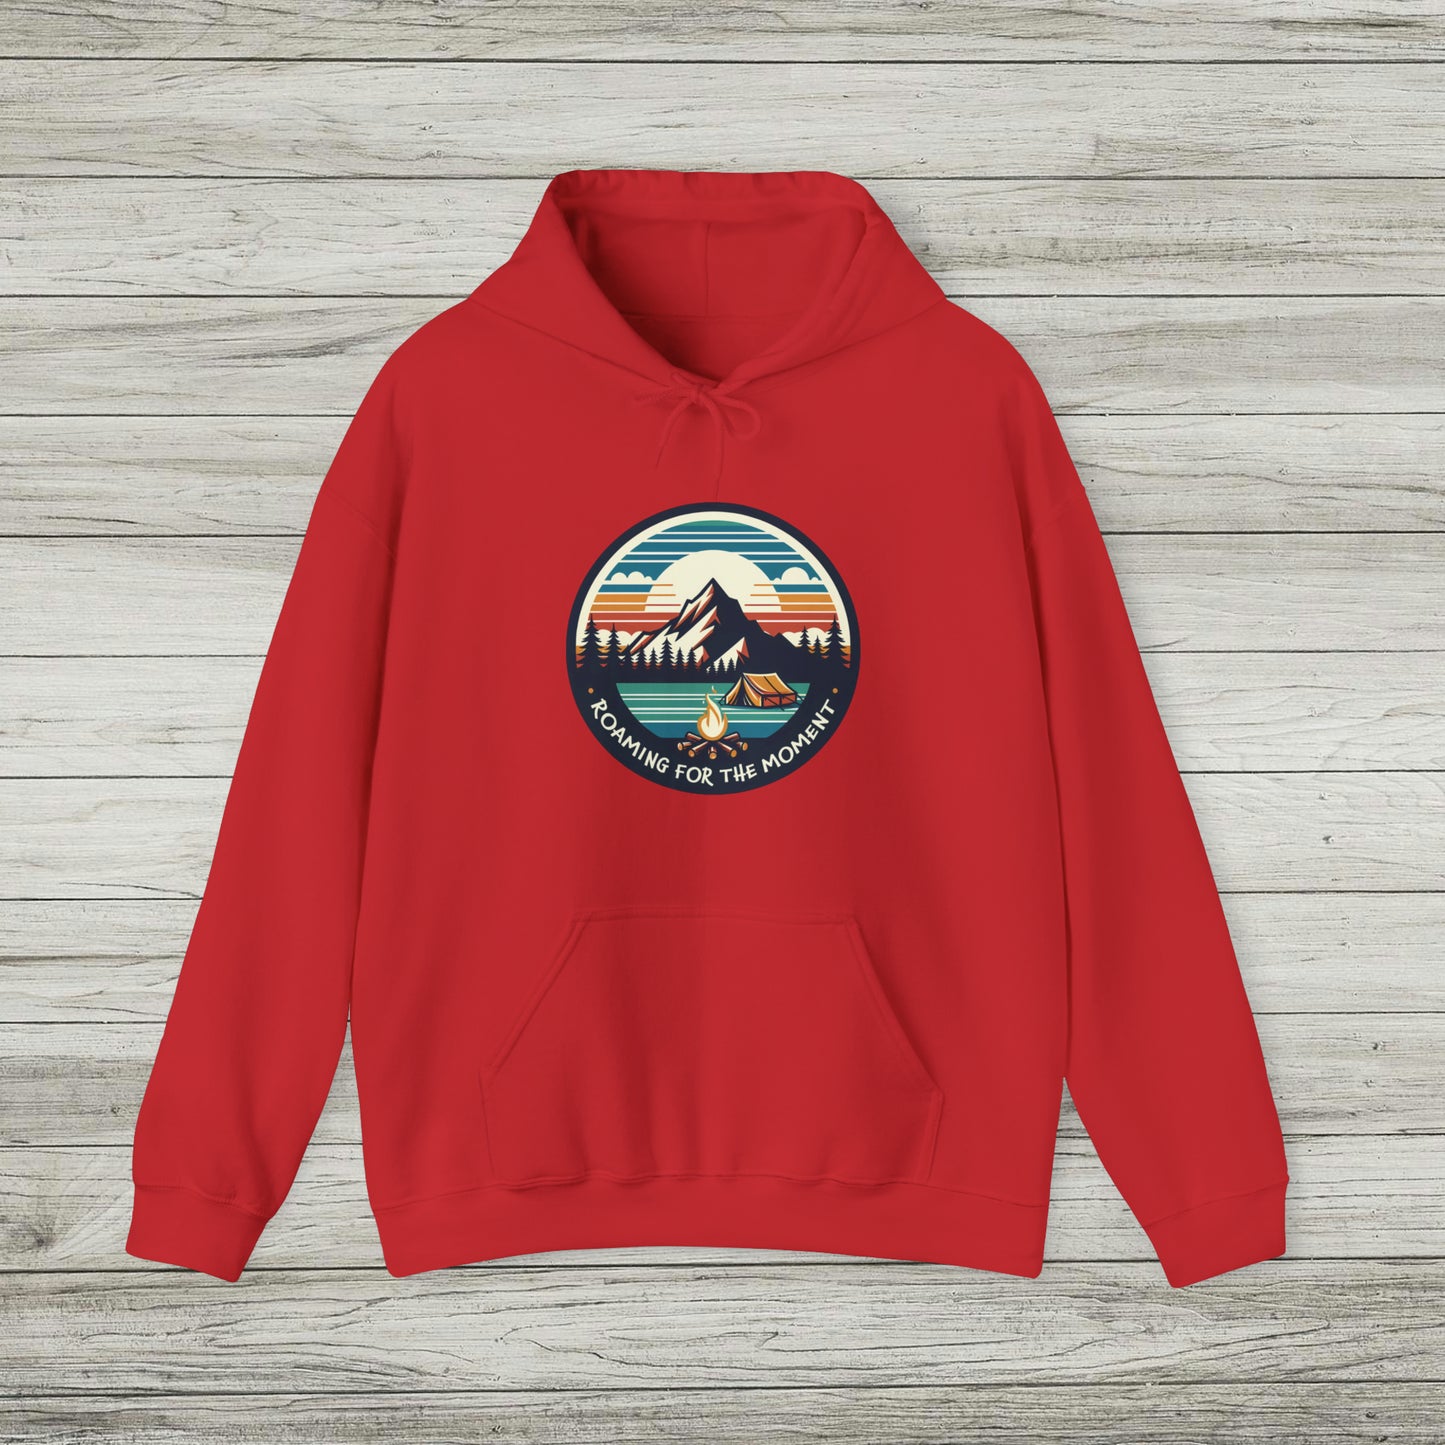 Camping Roaming Hoodie, Outdoor Adventures Hooded Sweatshirt, Retro Campfire Shirt, Gift for Camper Nature Wilderness Lovers